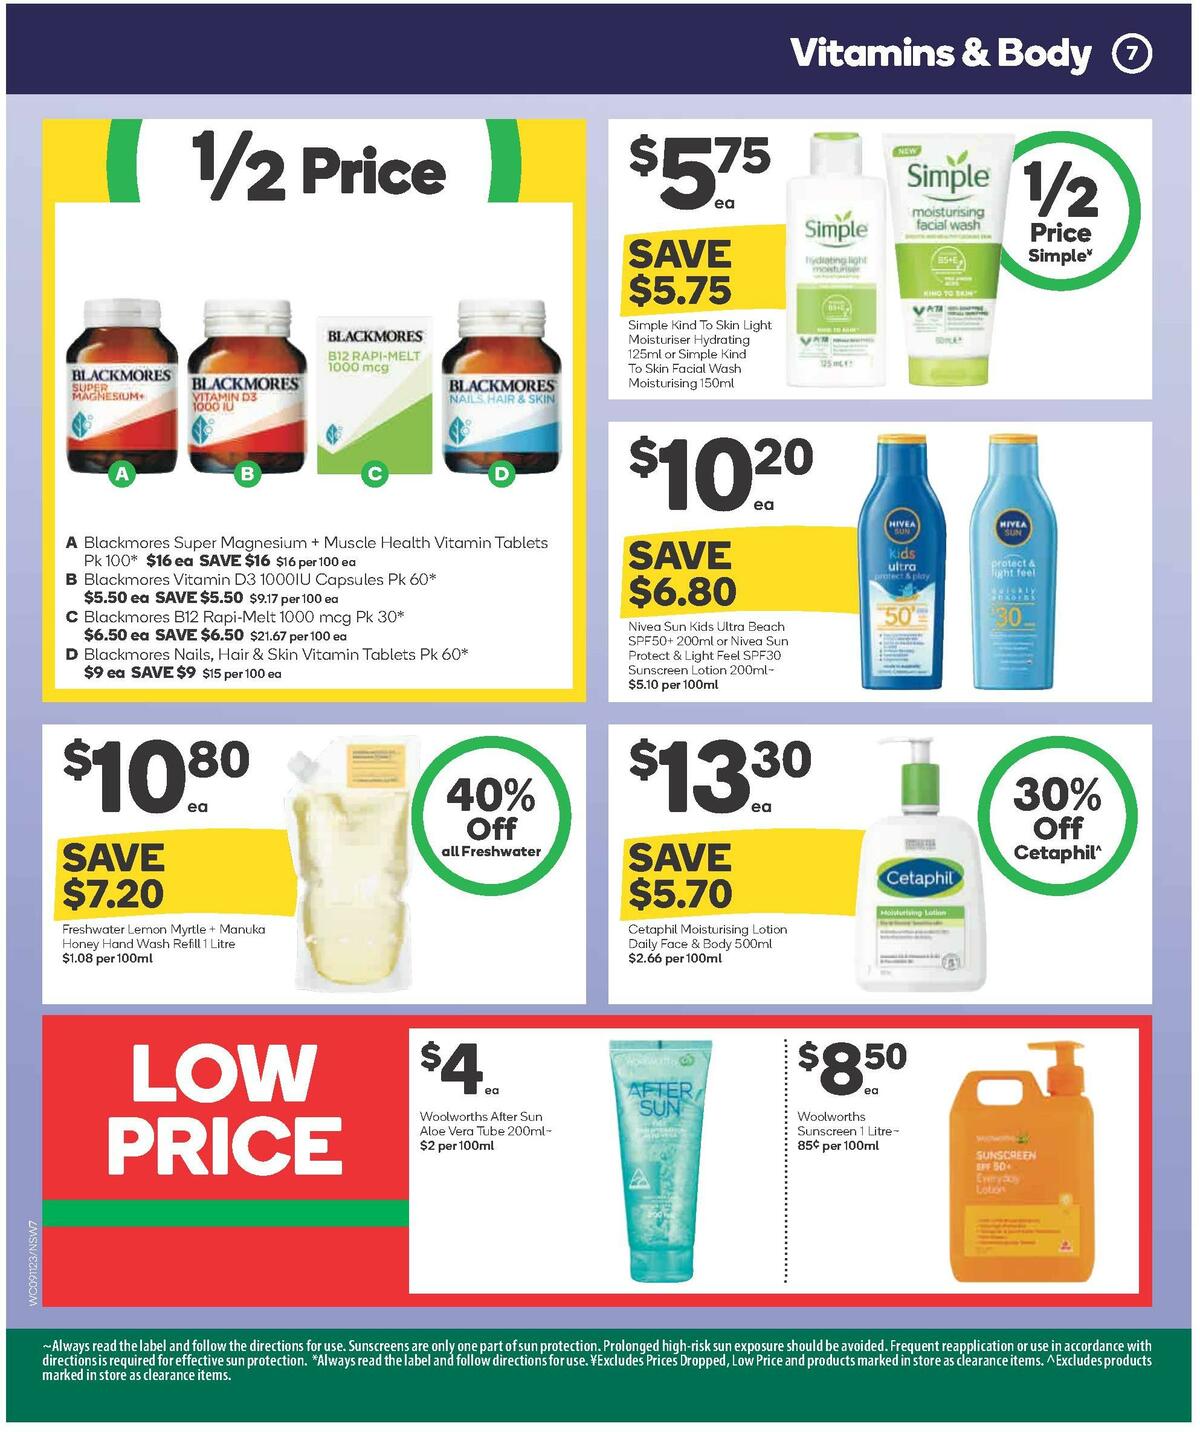 Woolworths Spring Health & Beauty Catalogues from 9 November